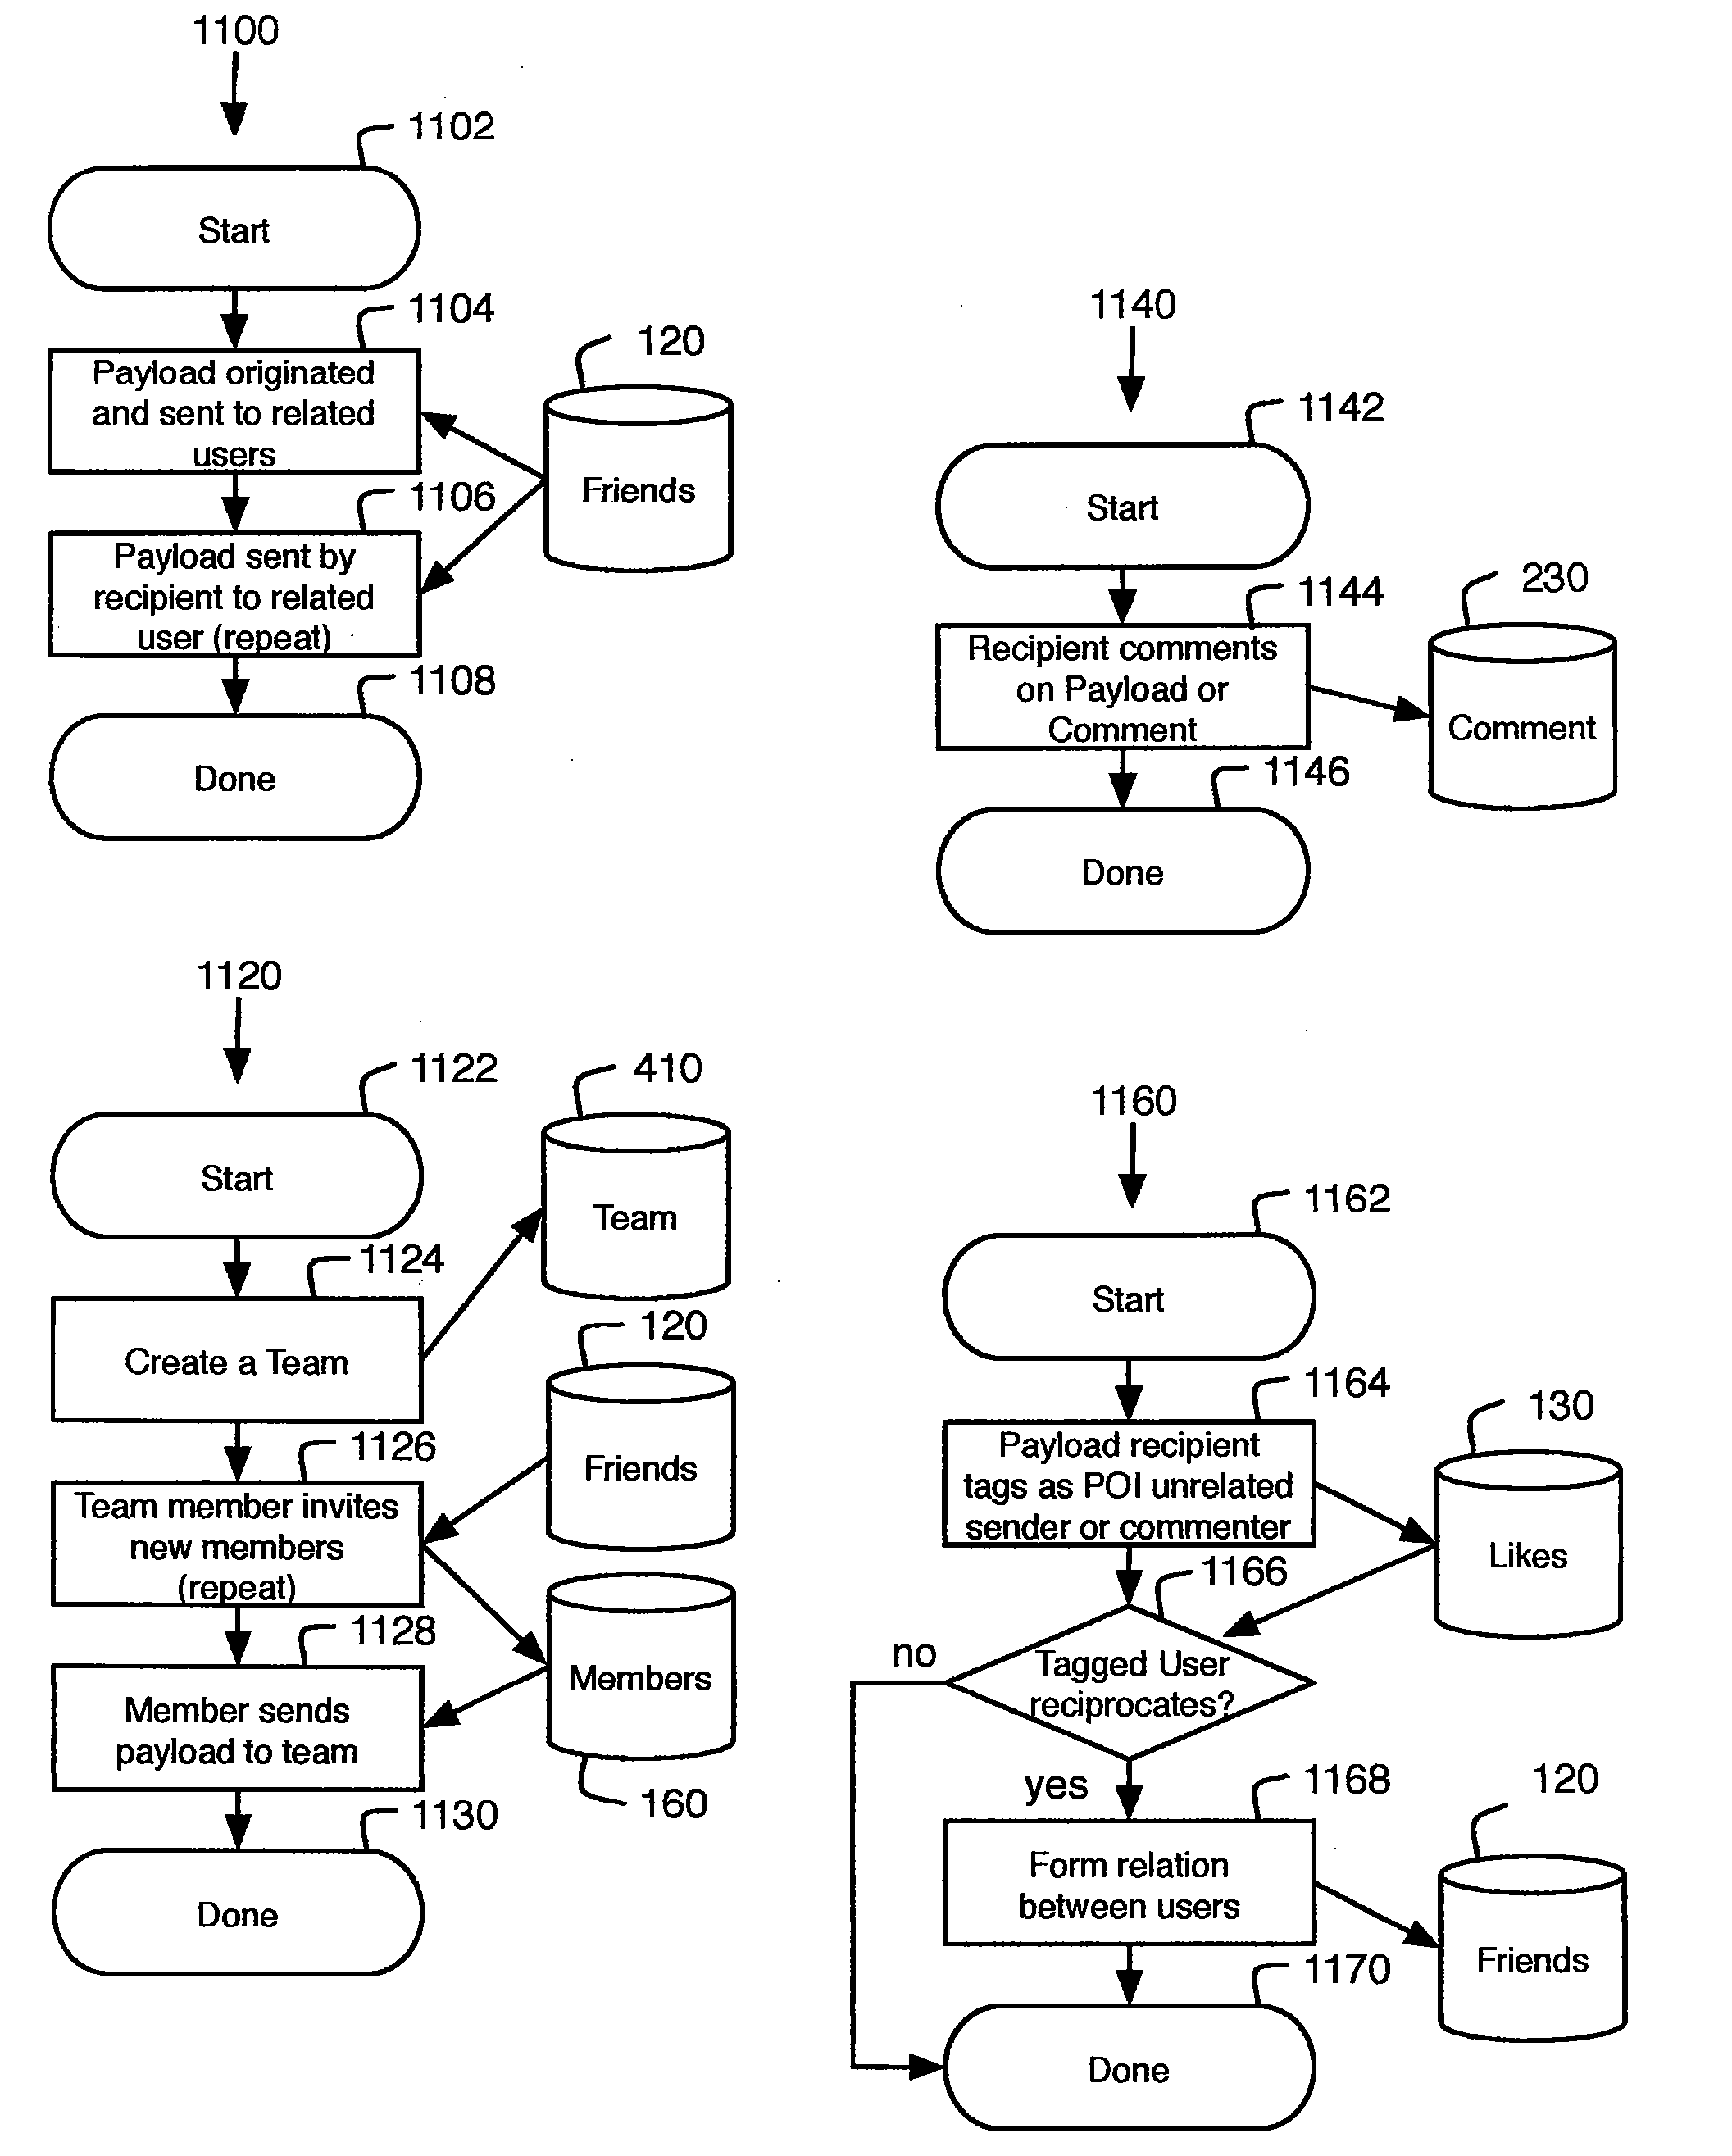 Method and apparatus for improved referral to resources and a related social network